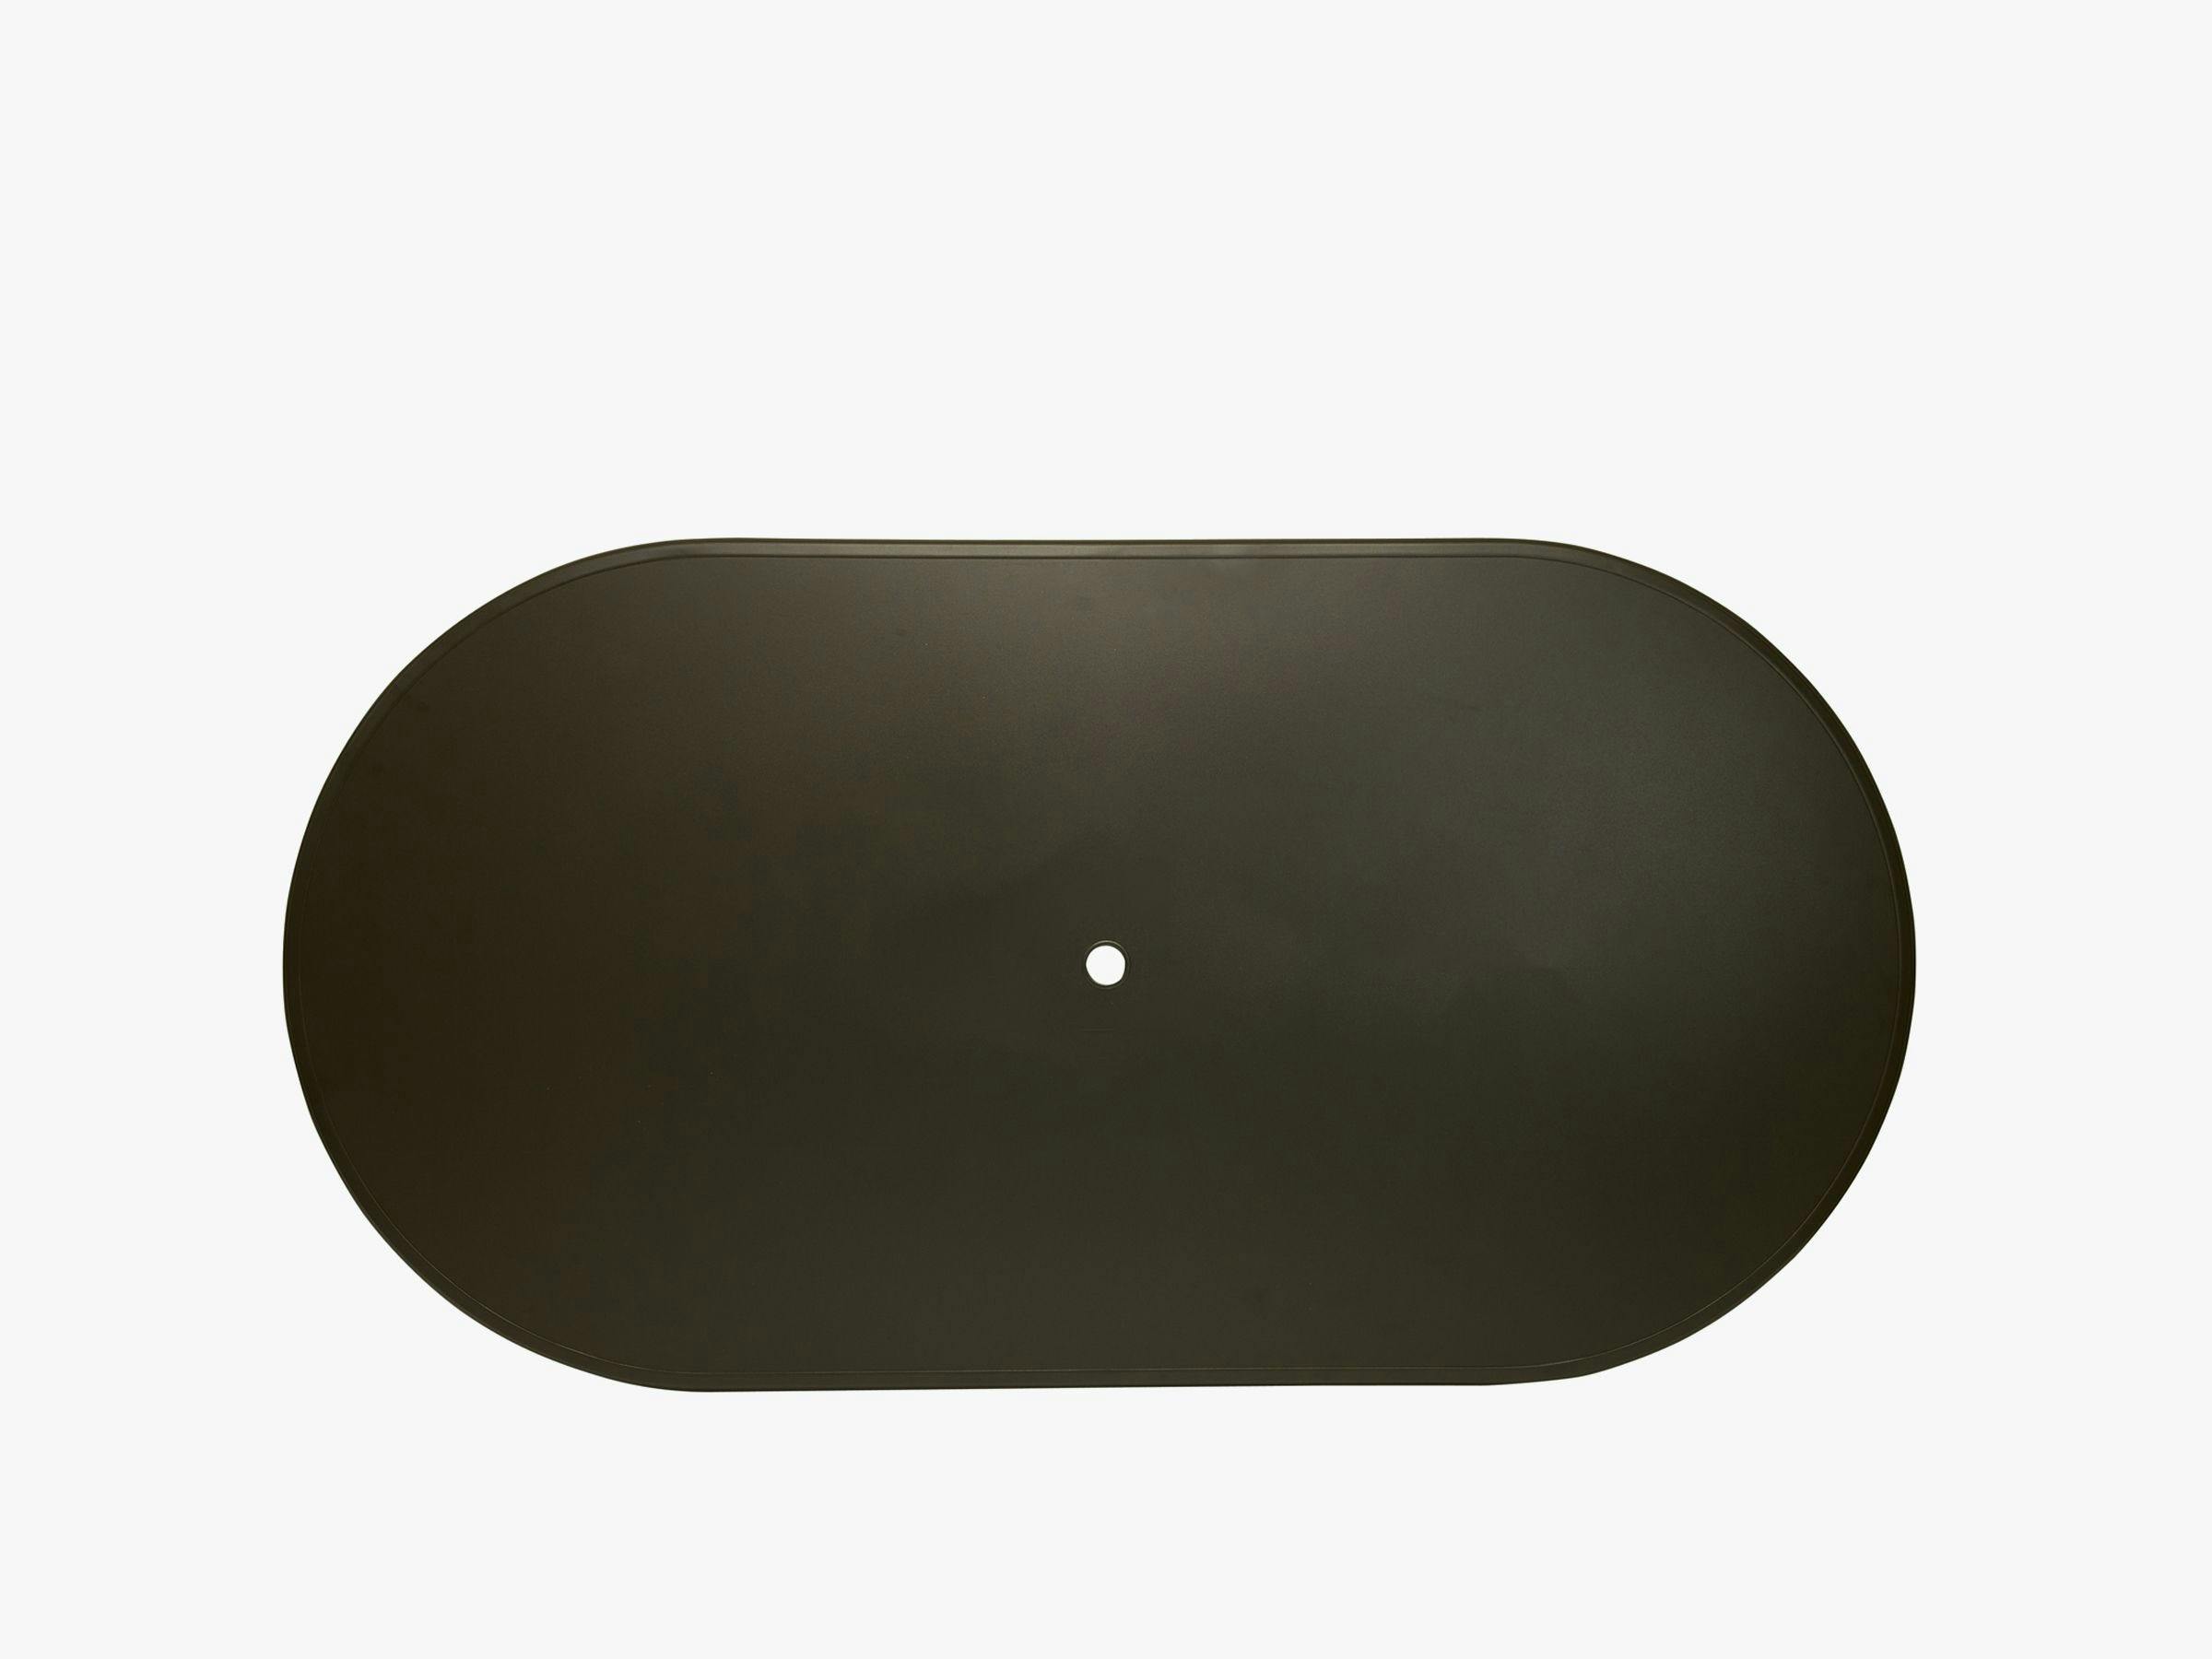 84" x 44" Oval Top with Hole (No Pattern)